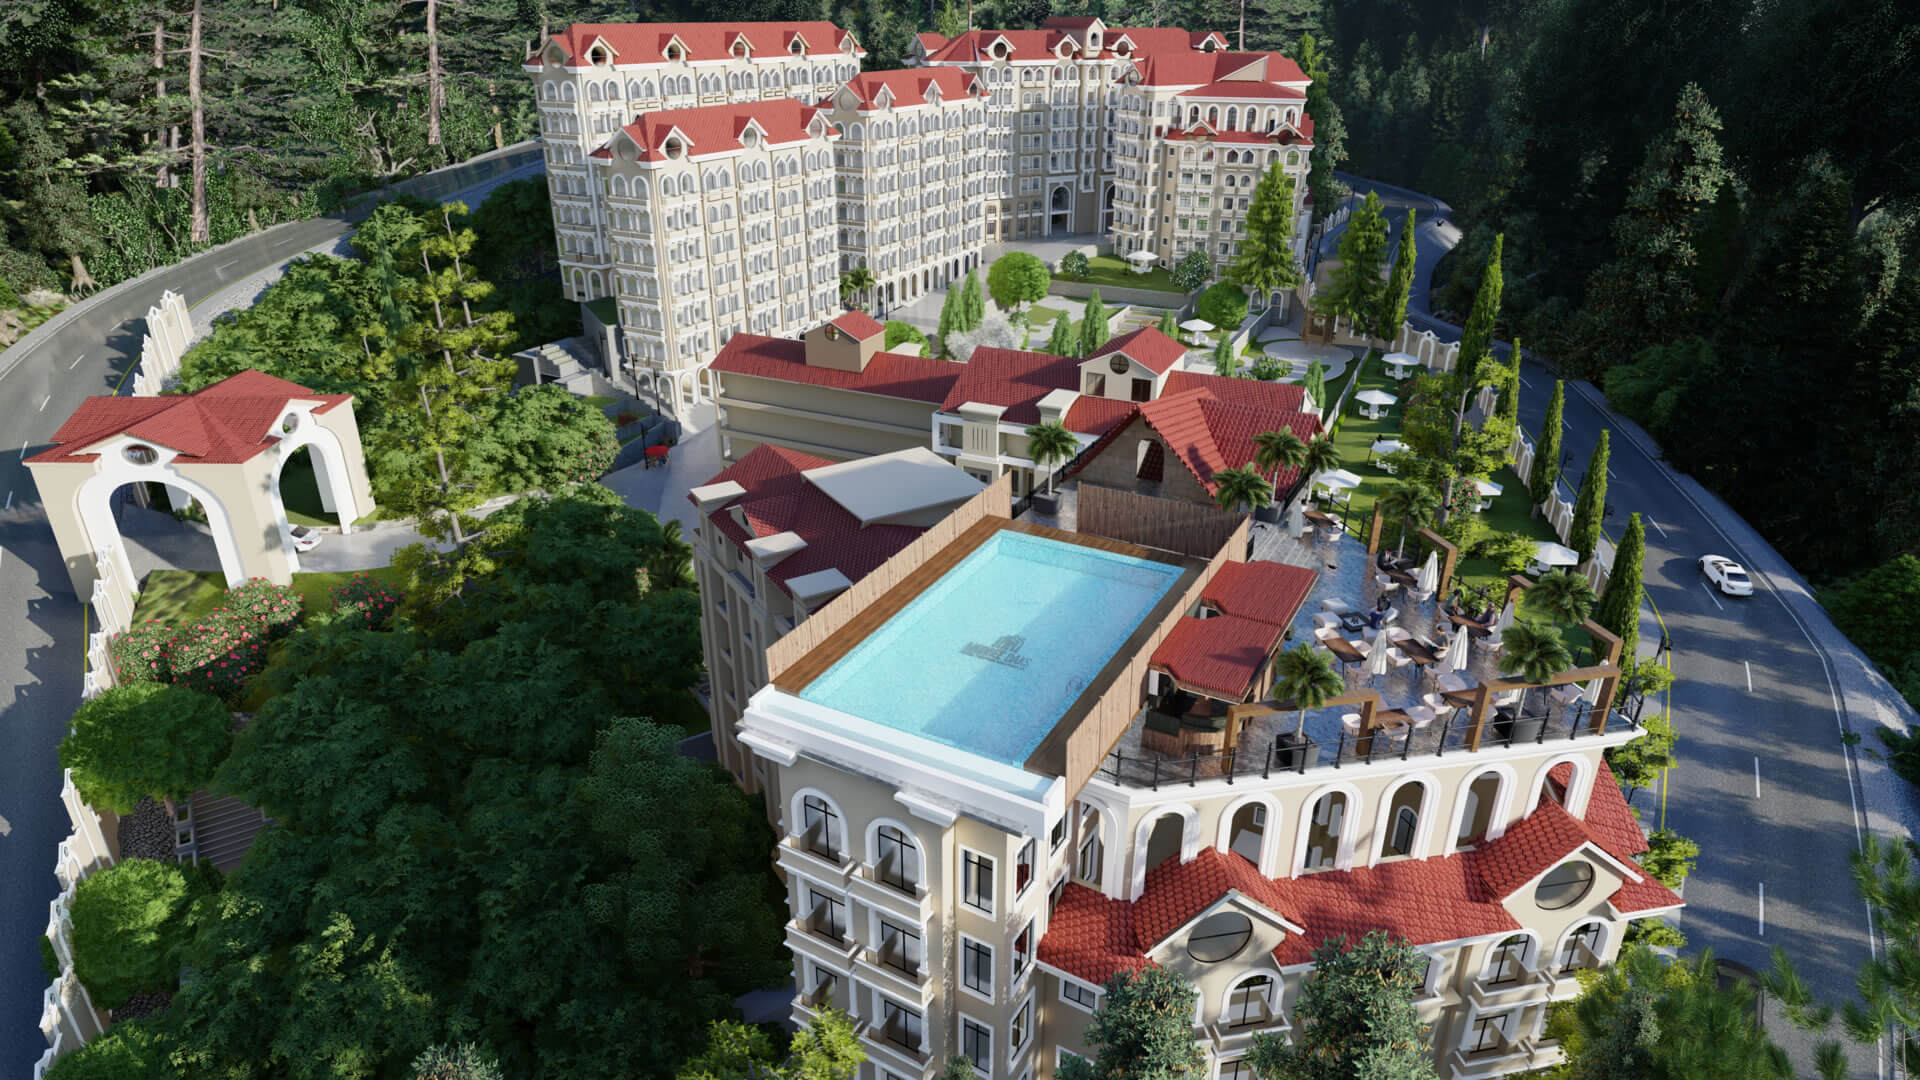 Muree Oaks Apartments, Studio, 1, 2 Bed Luxurious Apartments, Booking Detail